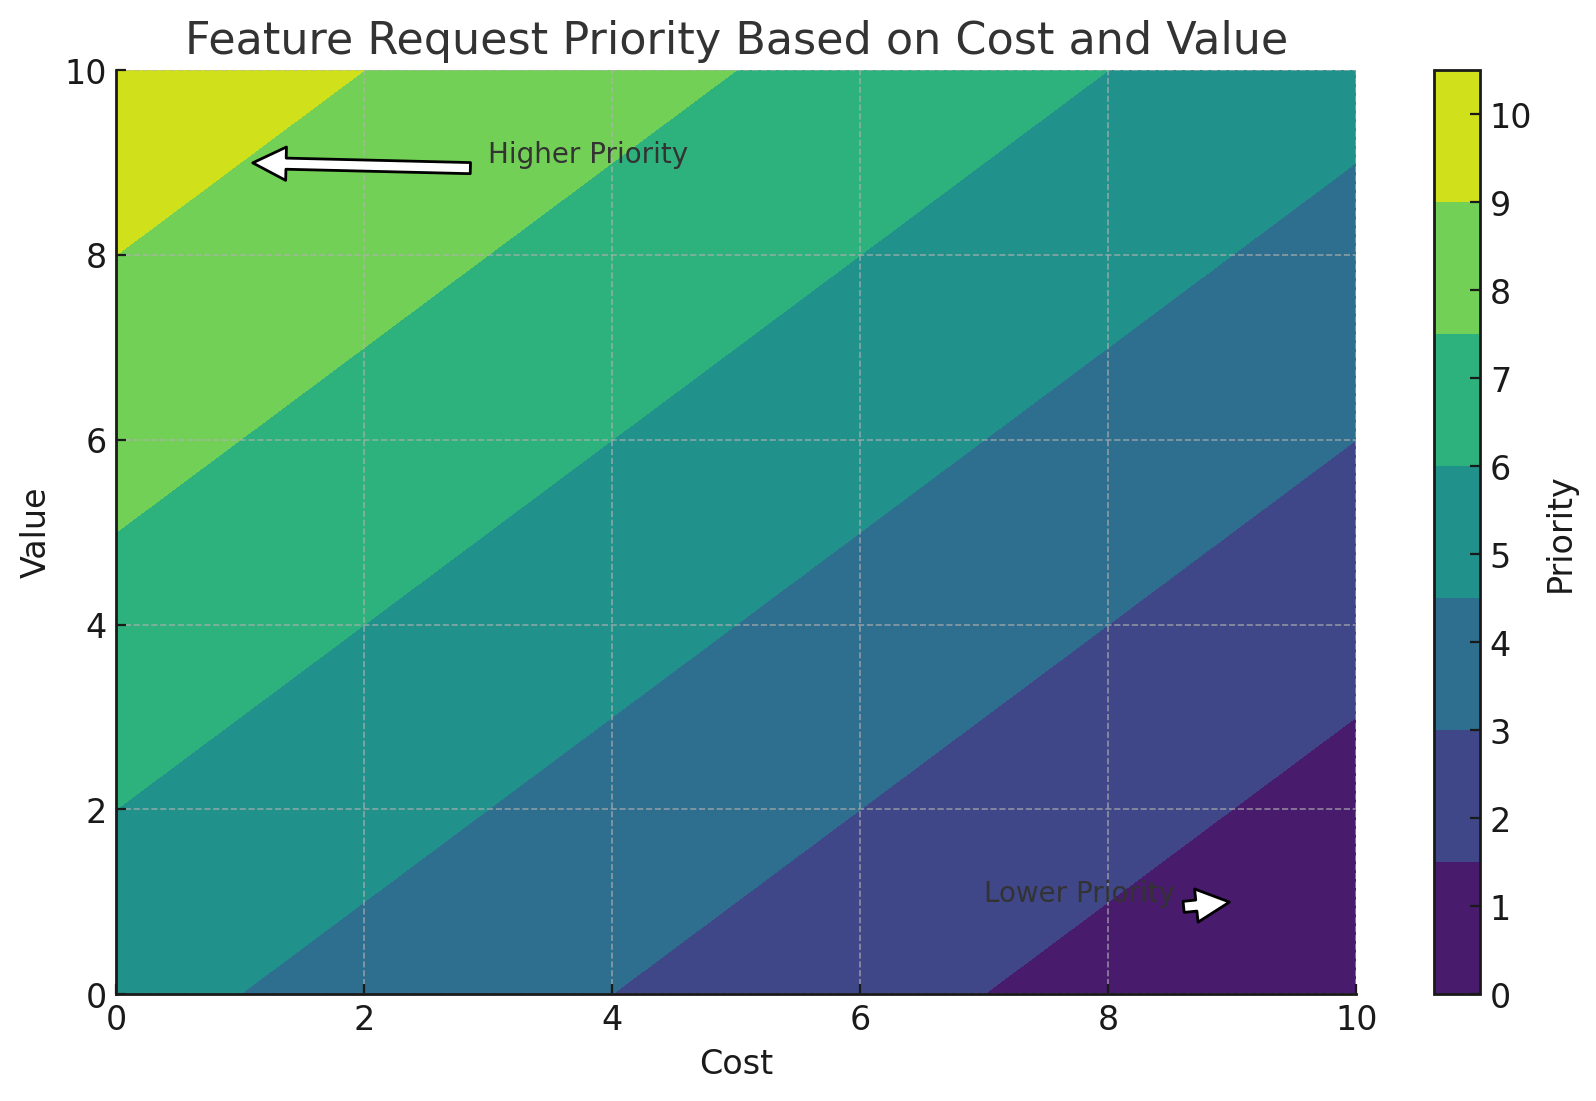 Feature request priority based on cost and value